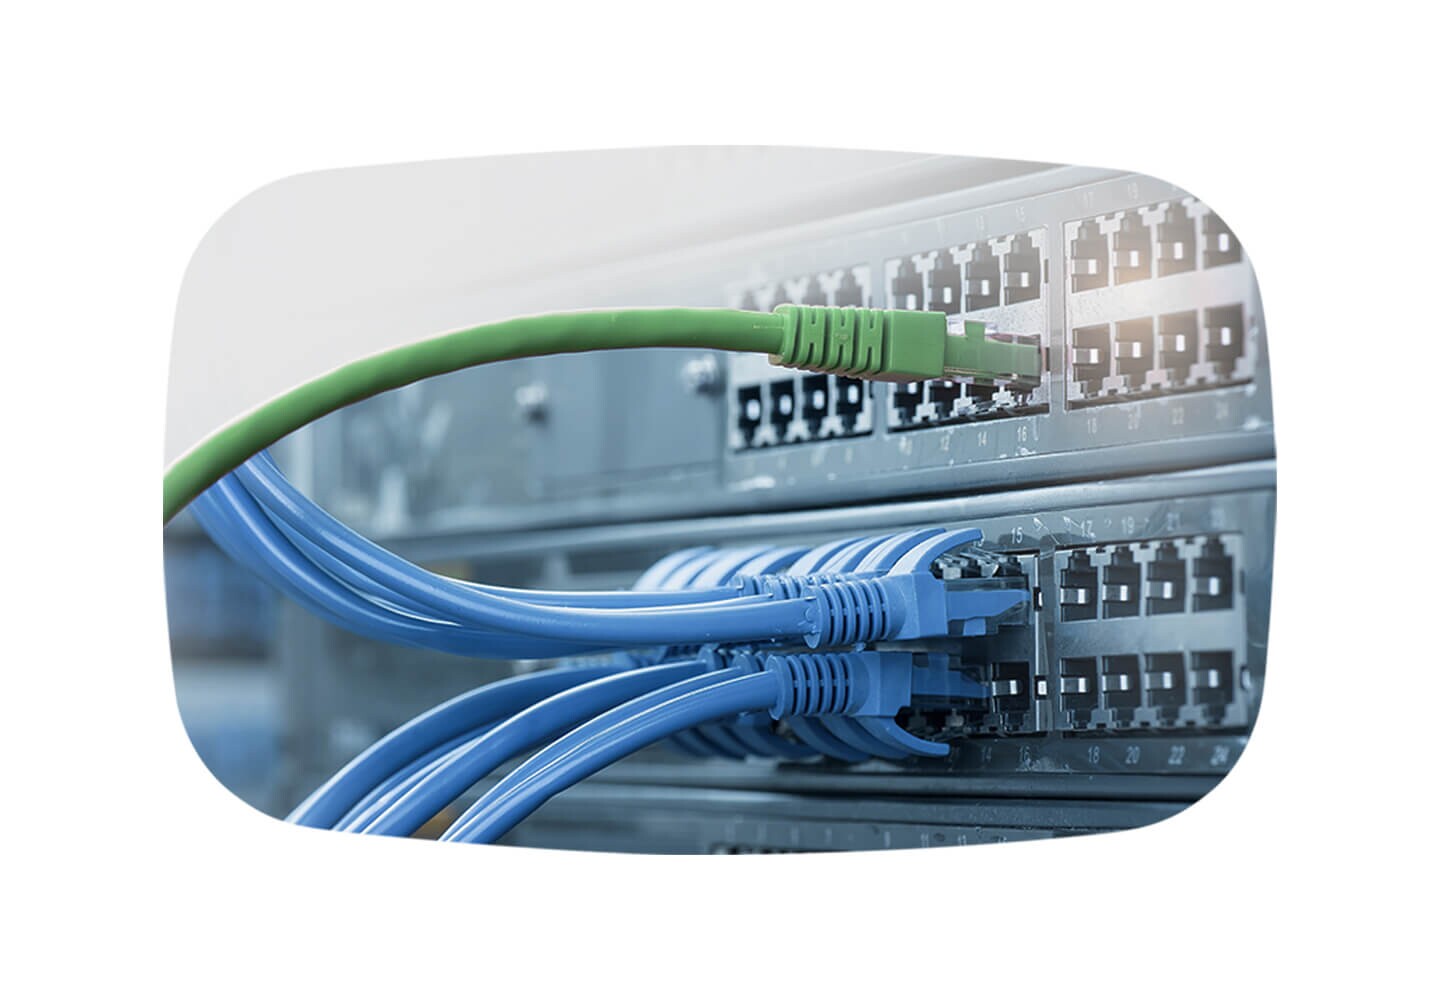 Wired connectivity with multi-gigabit switching